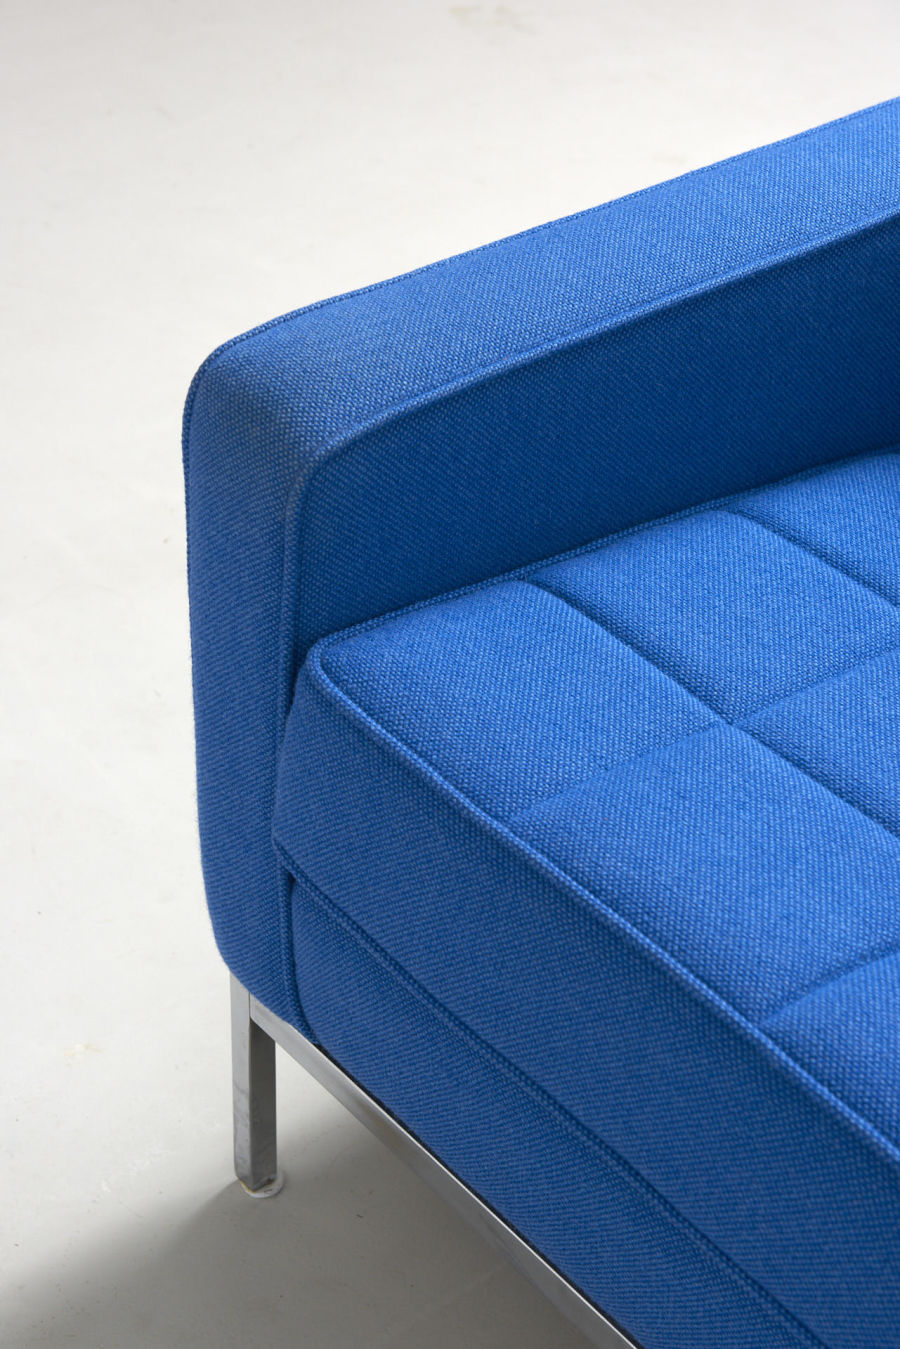 modestfurniture-vintage-1920-florence-knoll-easy-chair06